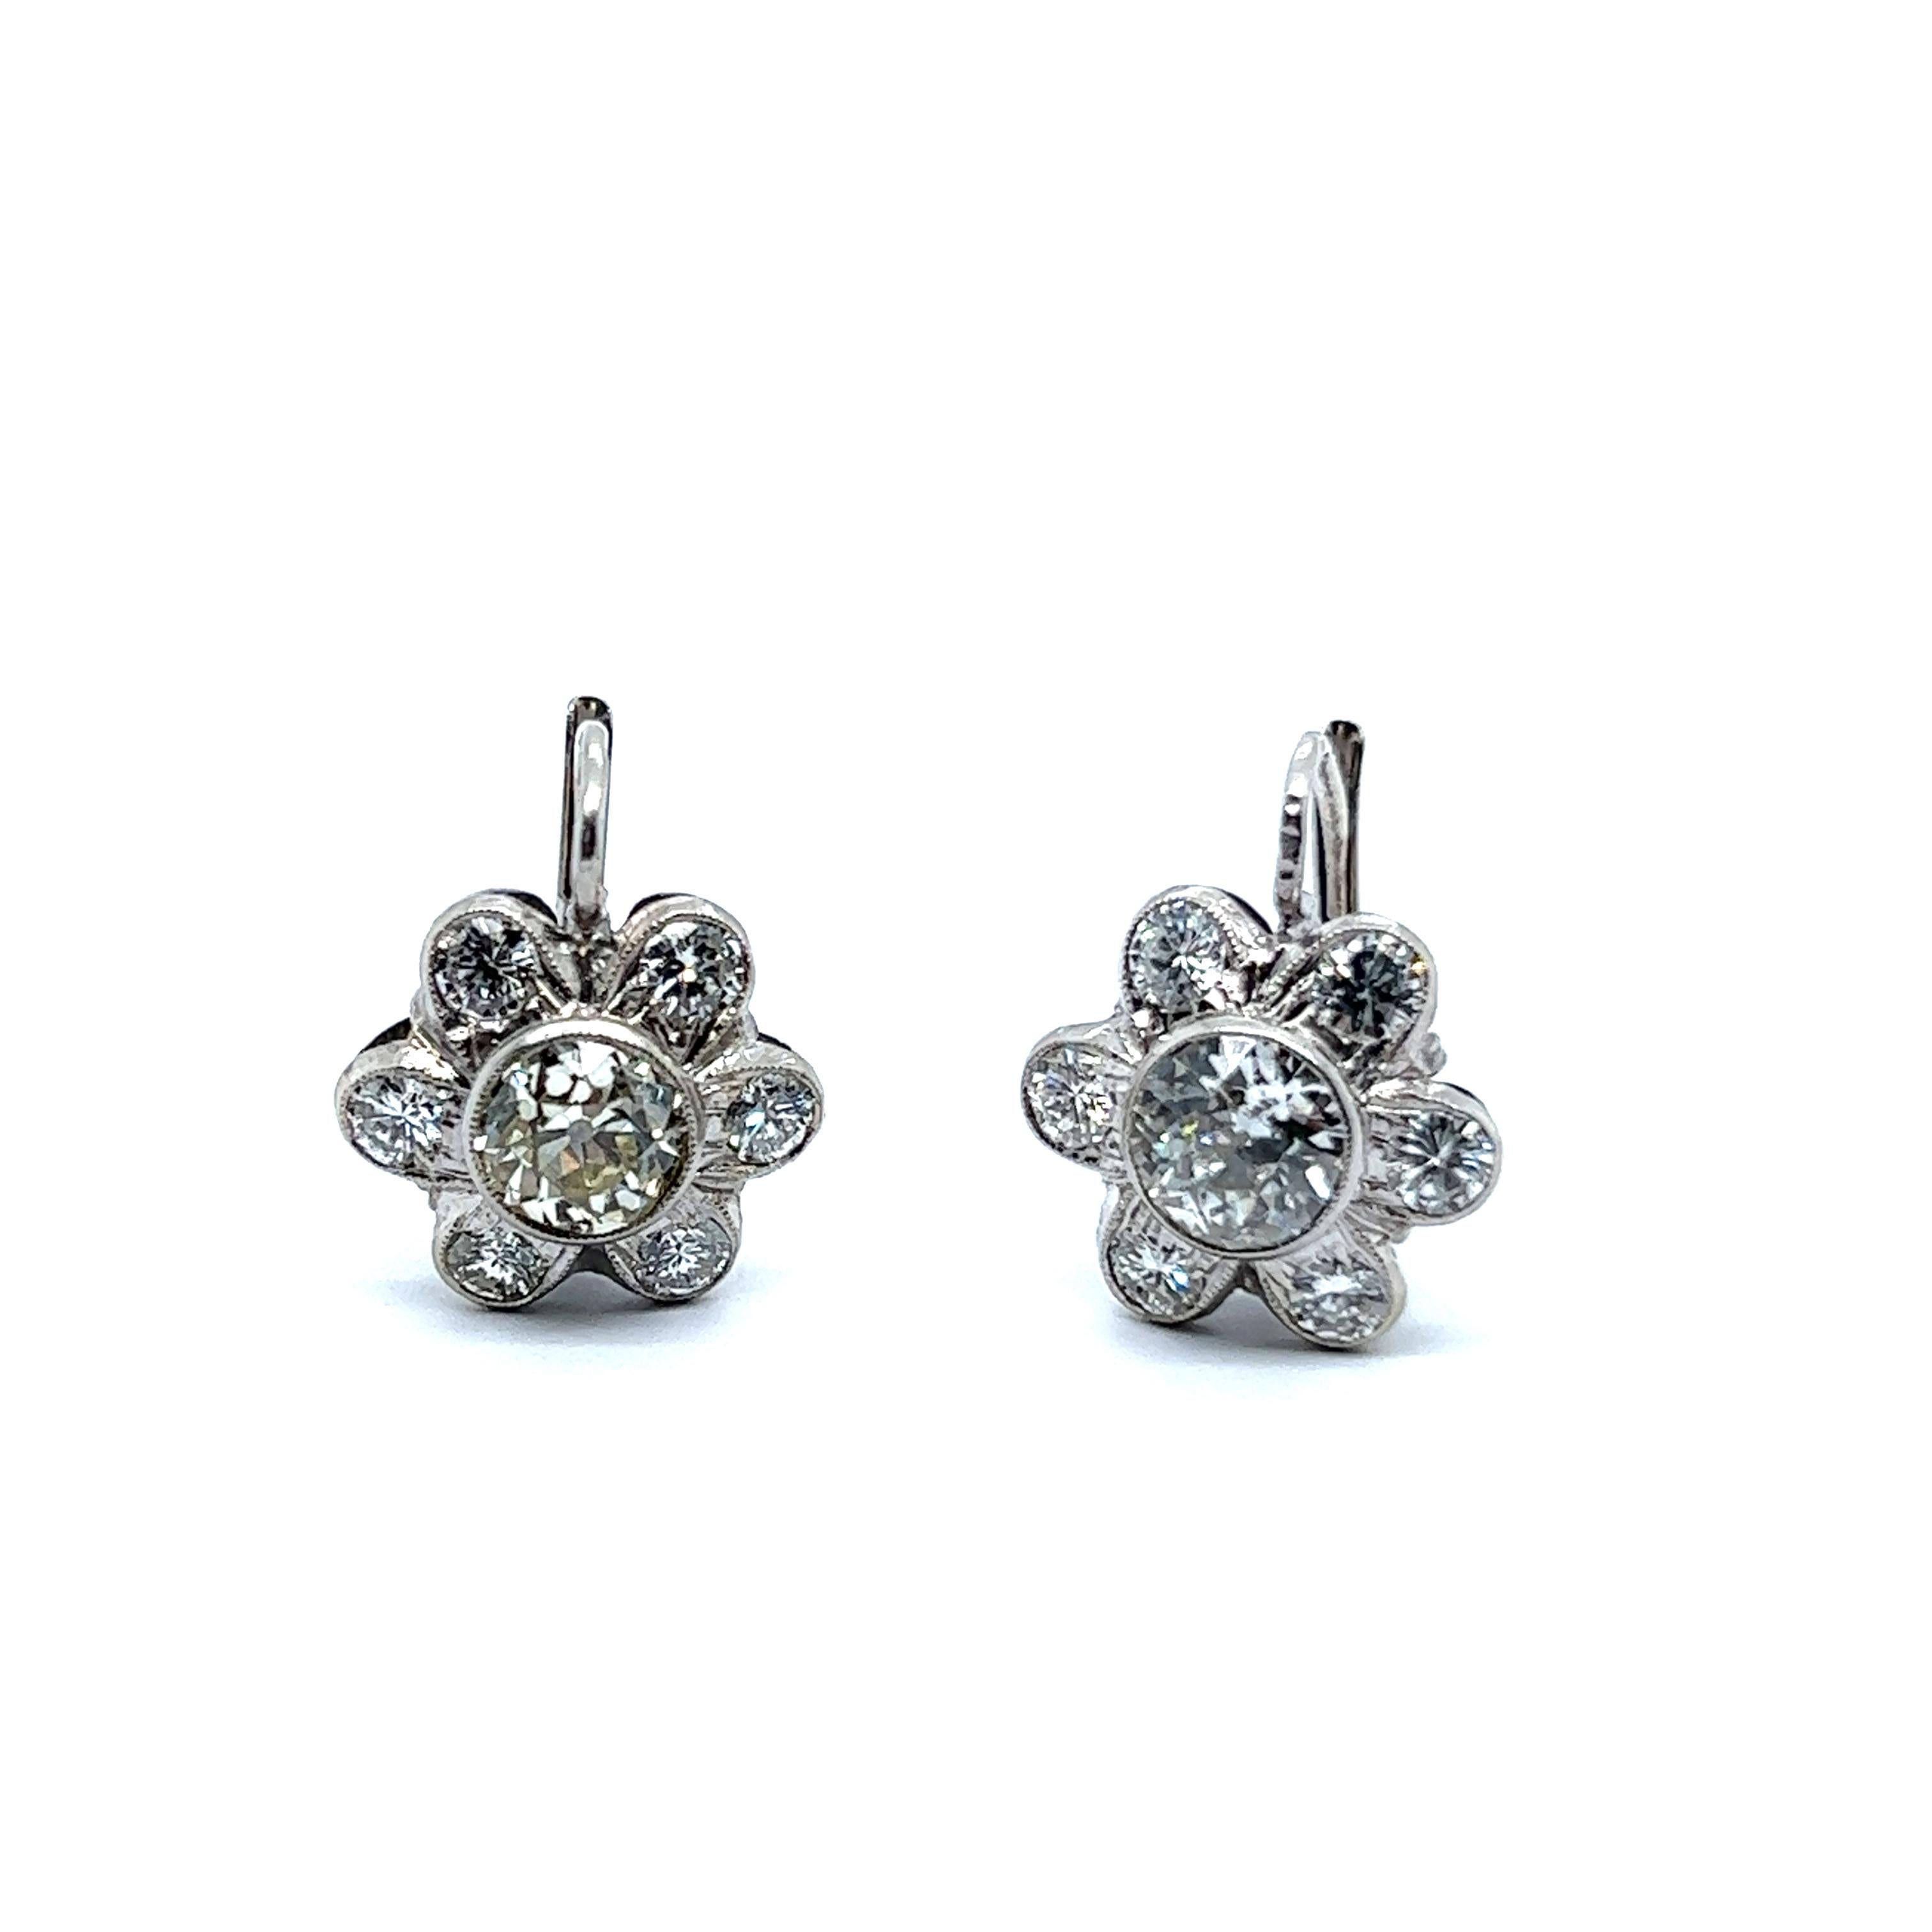 A beautiful embodiment of nature, floral motif earrings in 14 Karat white gold. 

A pair of charming diamond daisies are made in a lovely weave and feature two impressive old cut diamonds at the heart of each flower. One stone is 0.90 carats in M-N